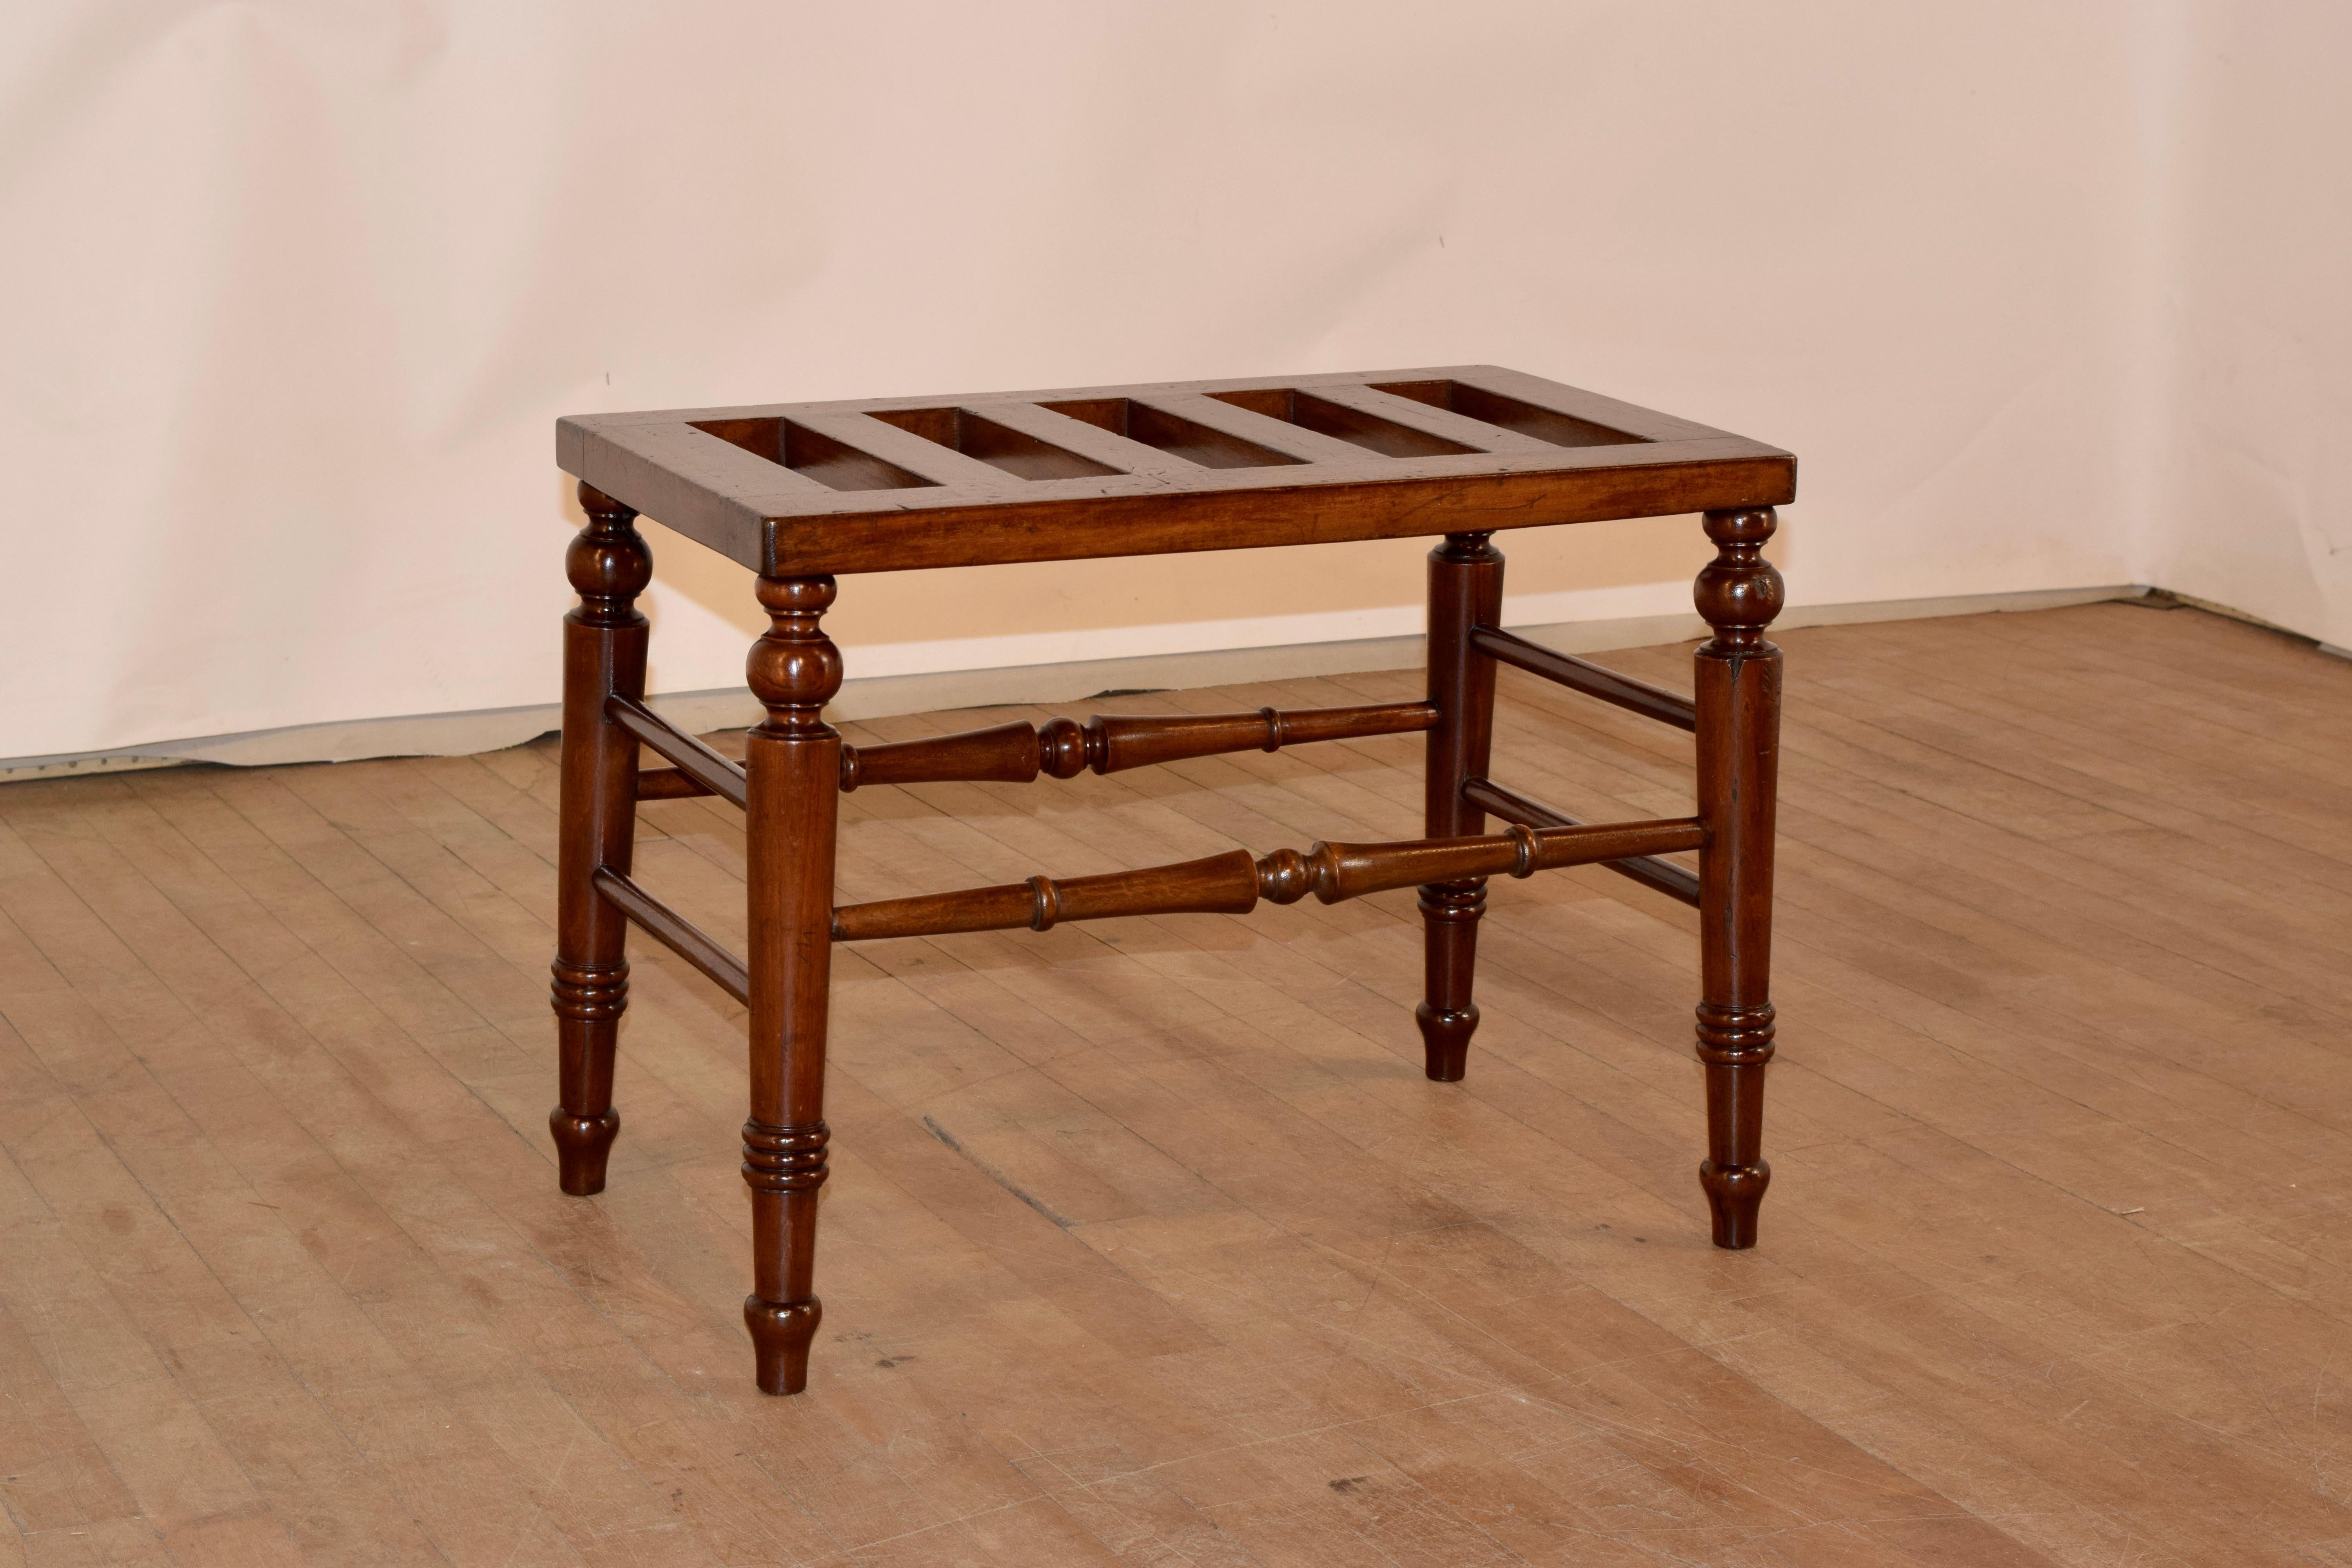 19th century mahogany luggage stand from England with a slatted top over hand turned and spayed legs, joined by lovely detailed stretchers.  